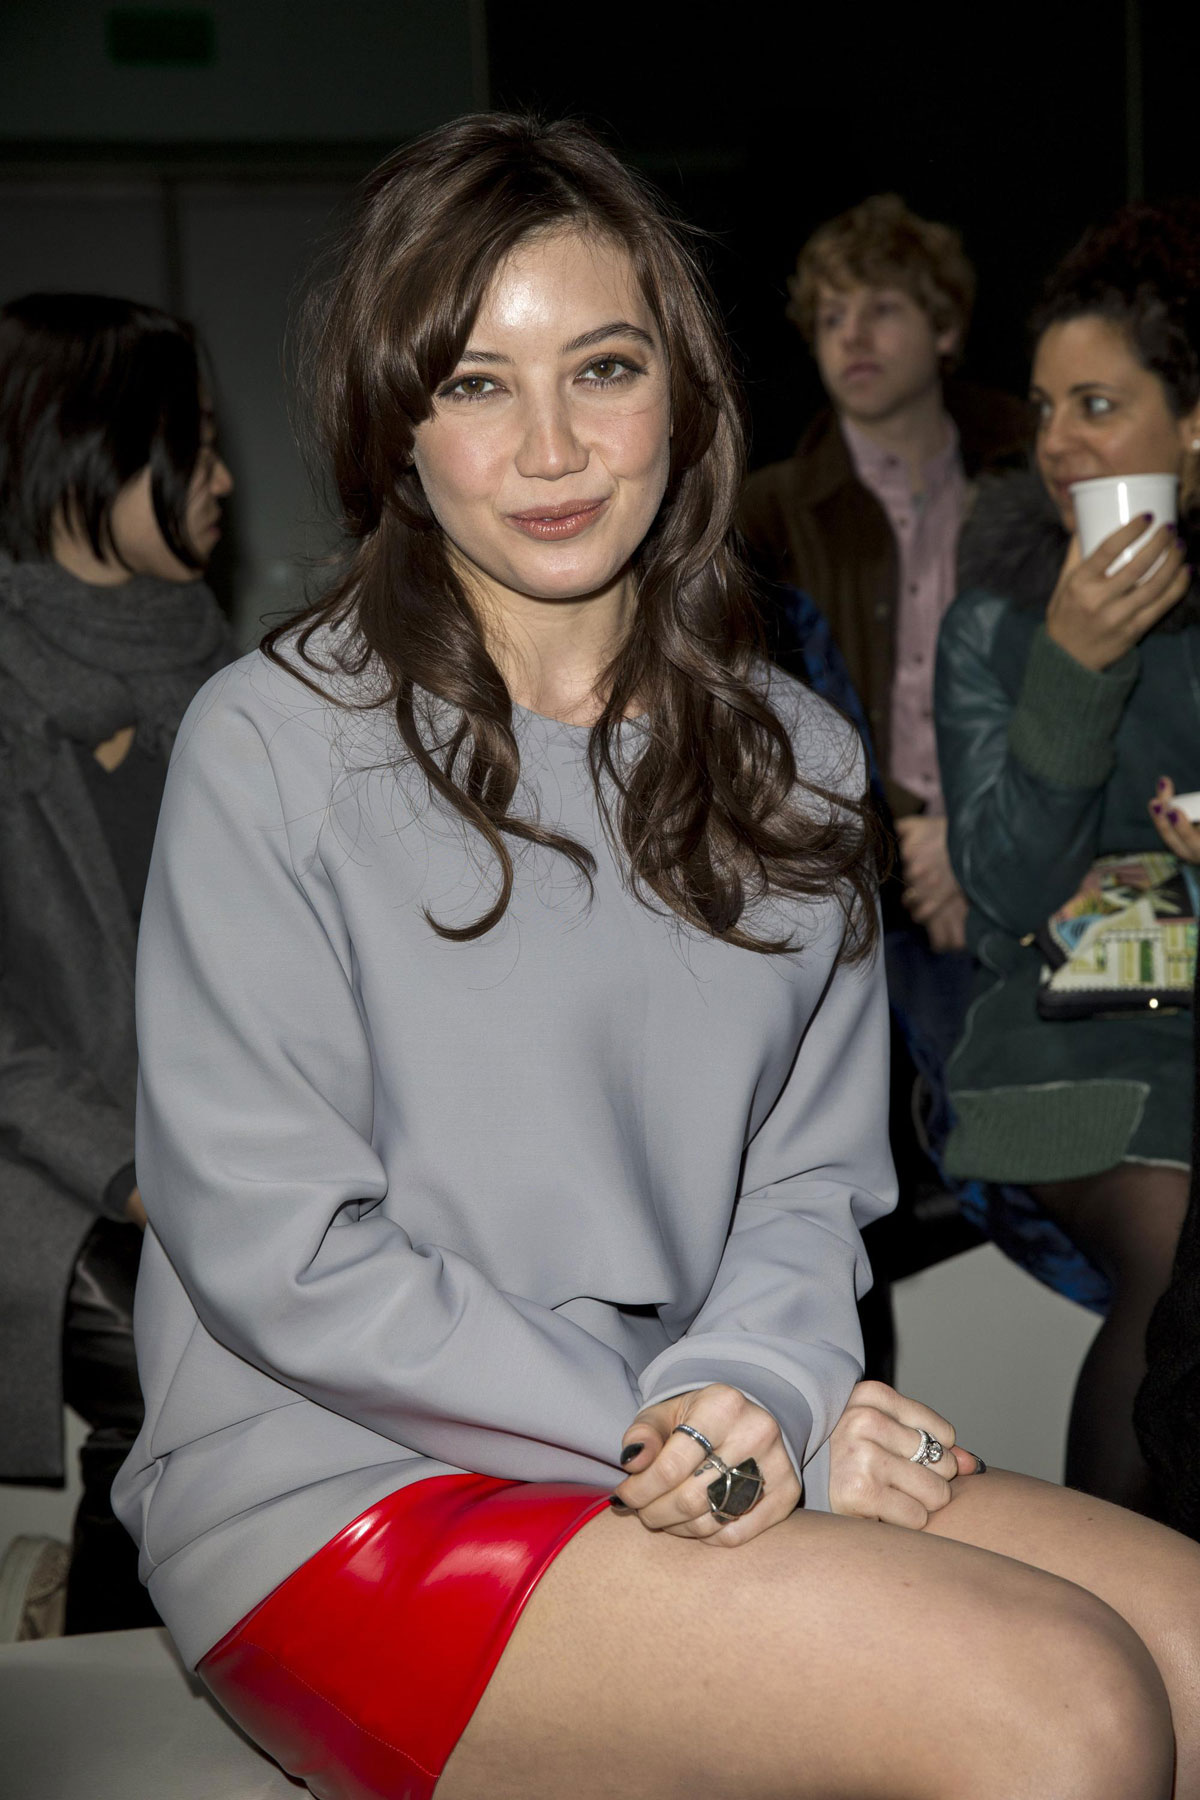 Daisy Lowe attends Fashion East show